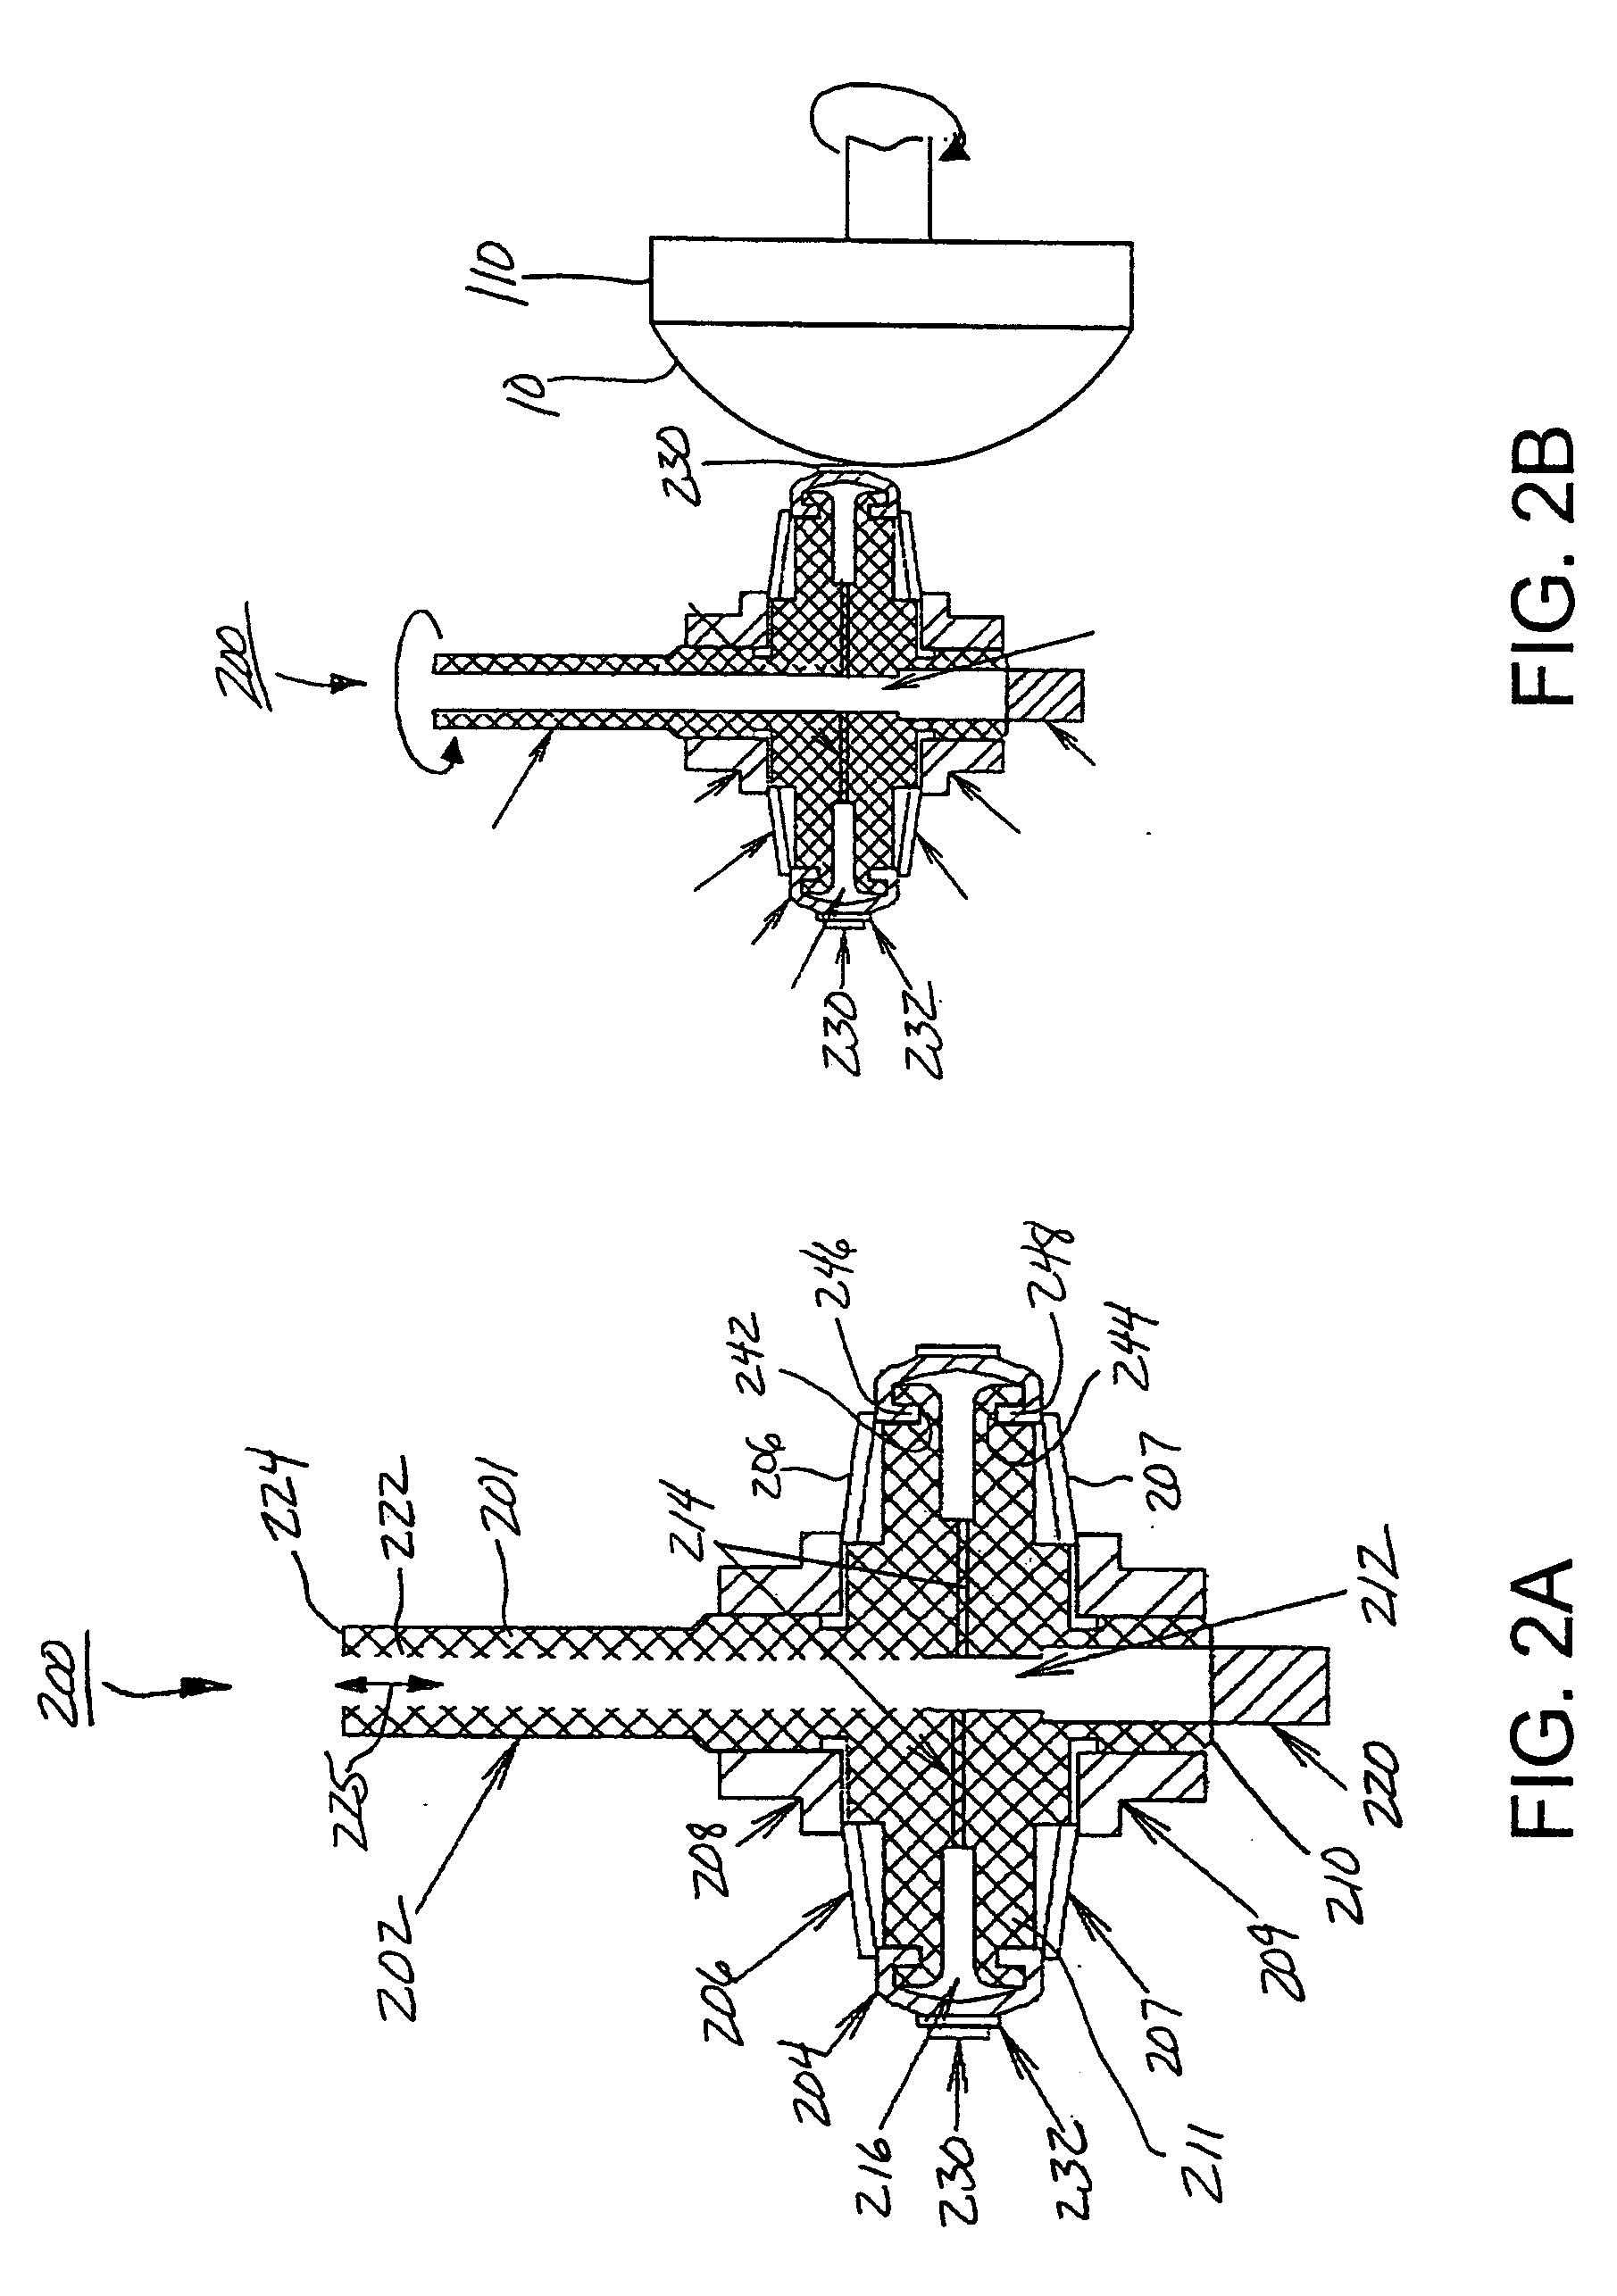 Tool, apparatus, and method for precision polishing of lenses and lens molds